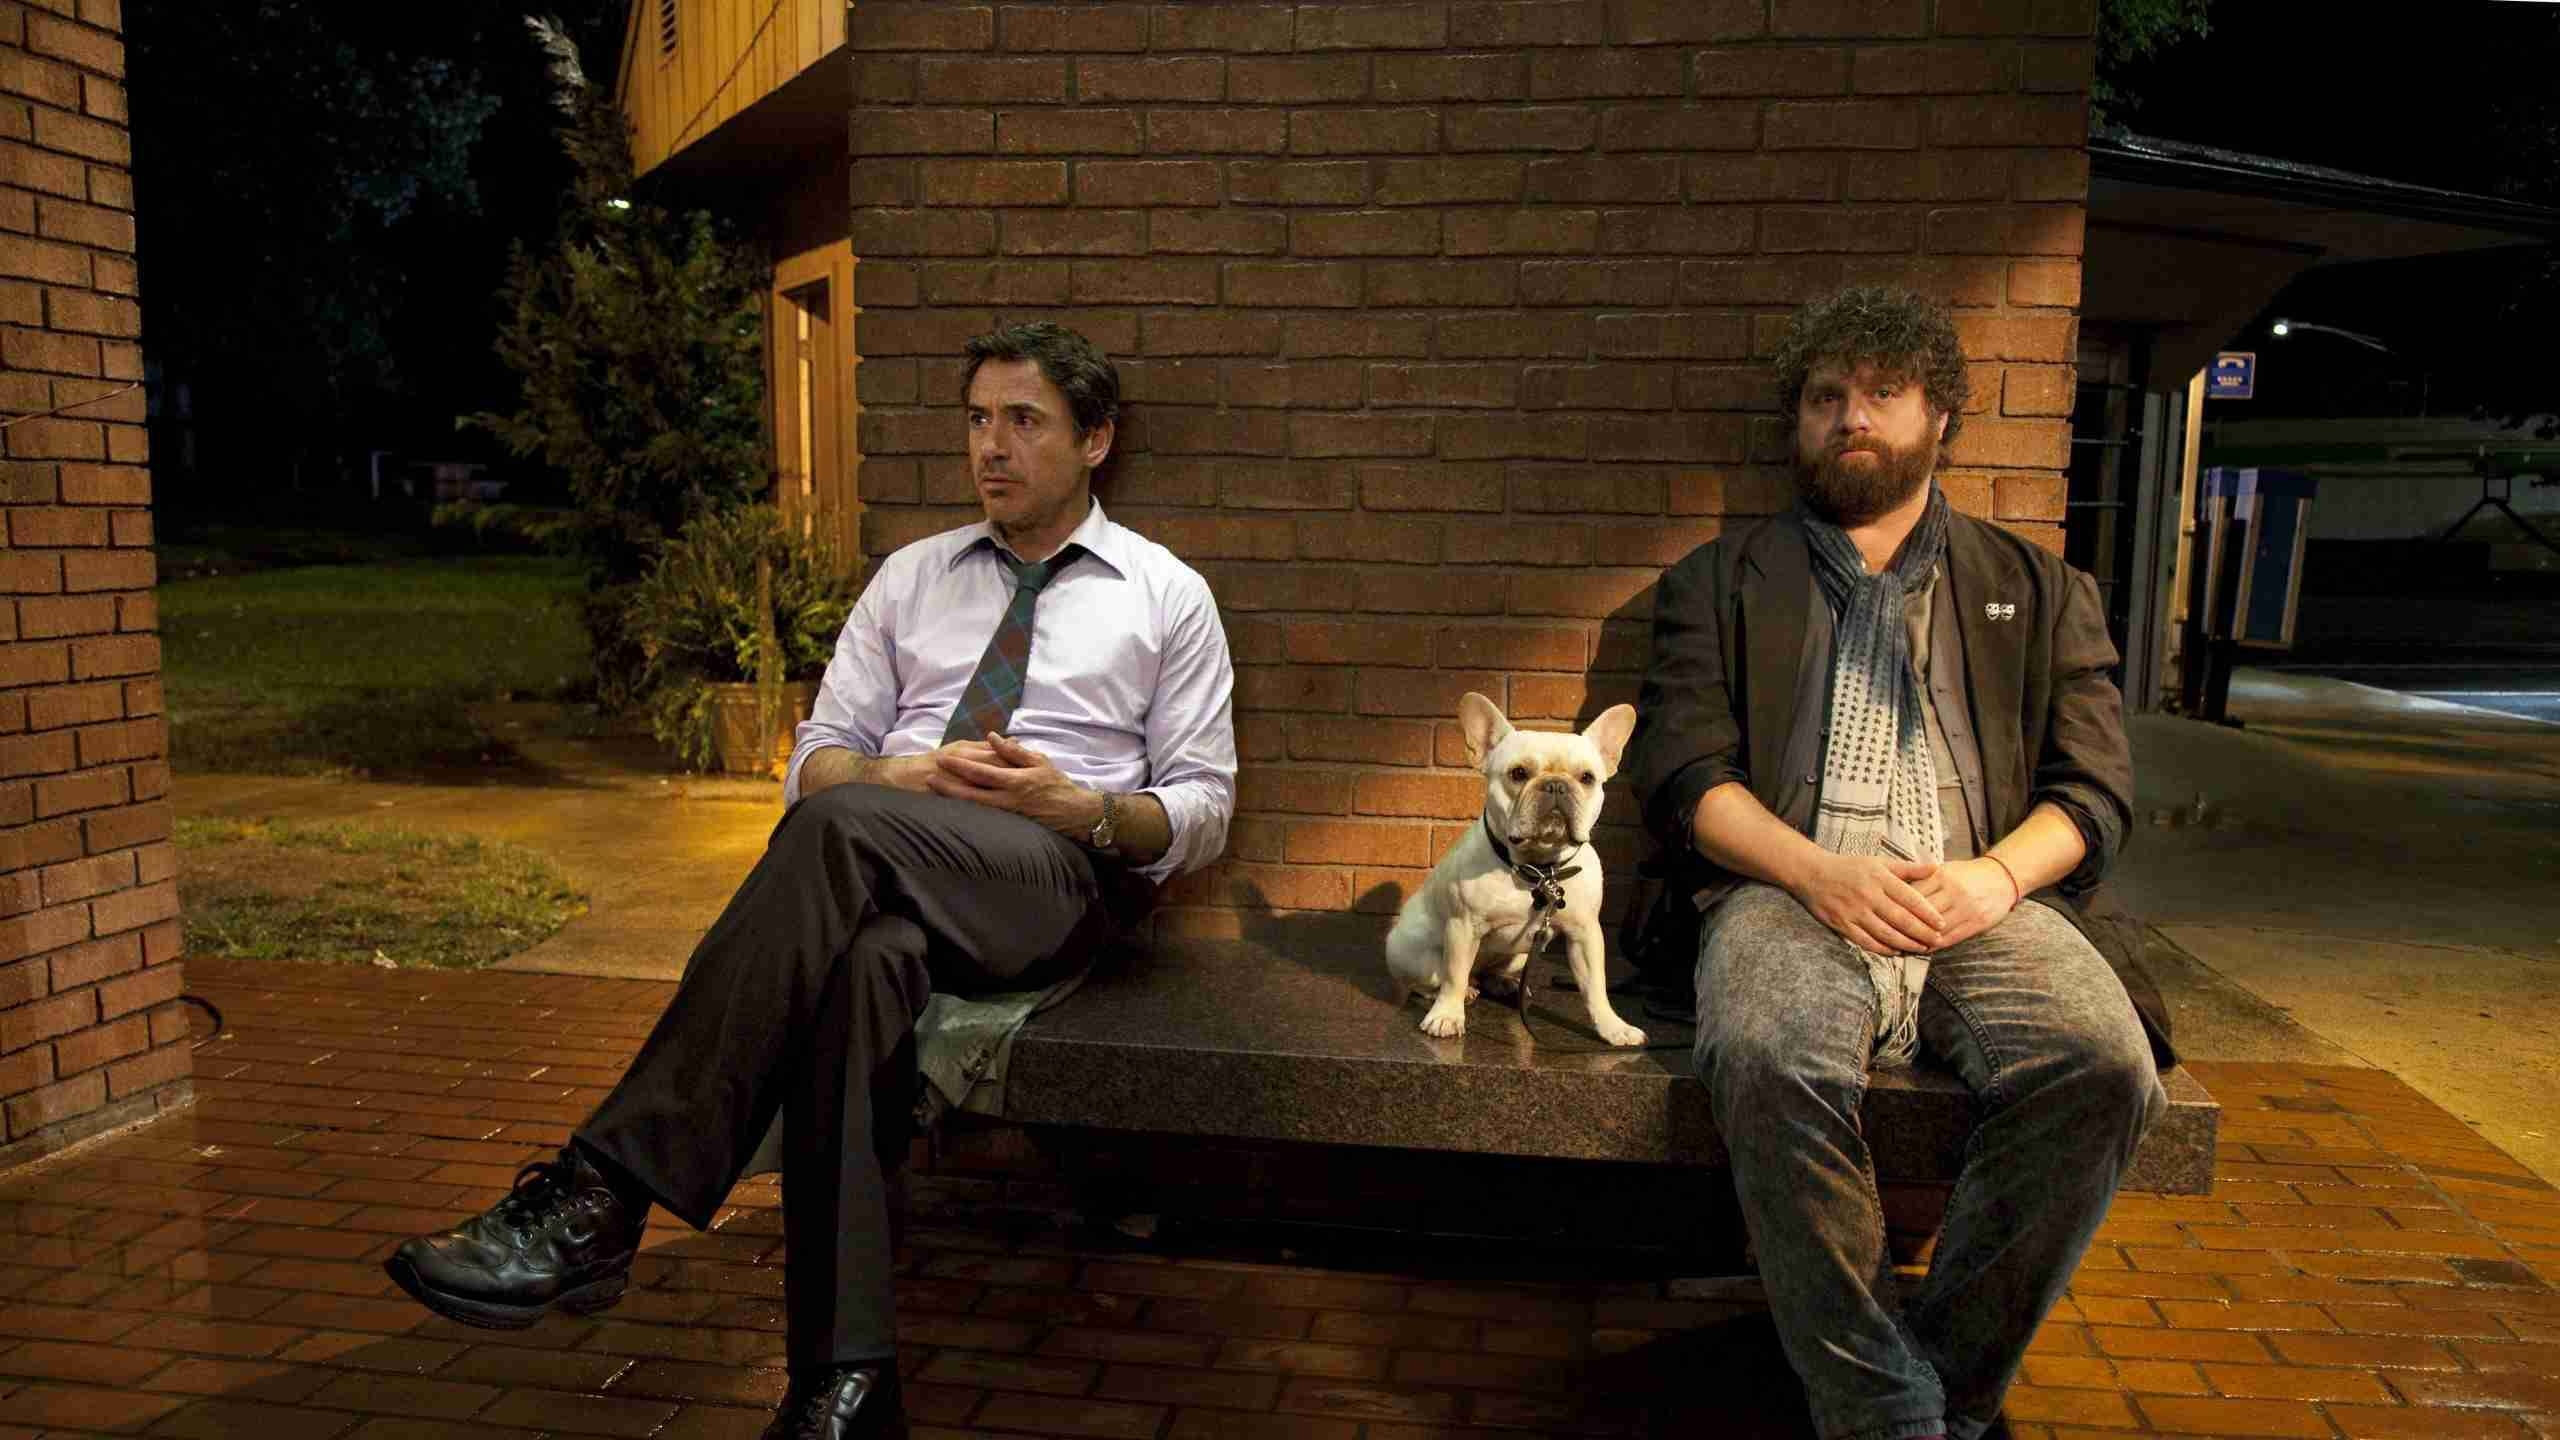 Due Date Actors for 2560x1440 HDTV resolution